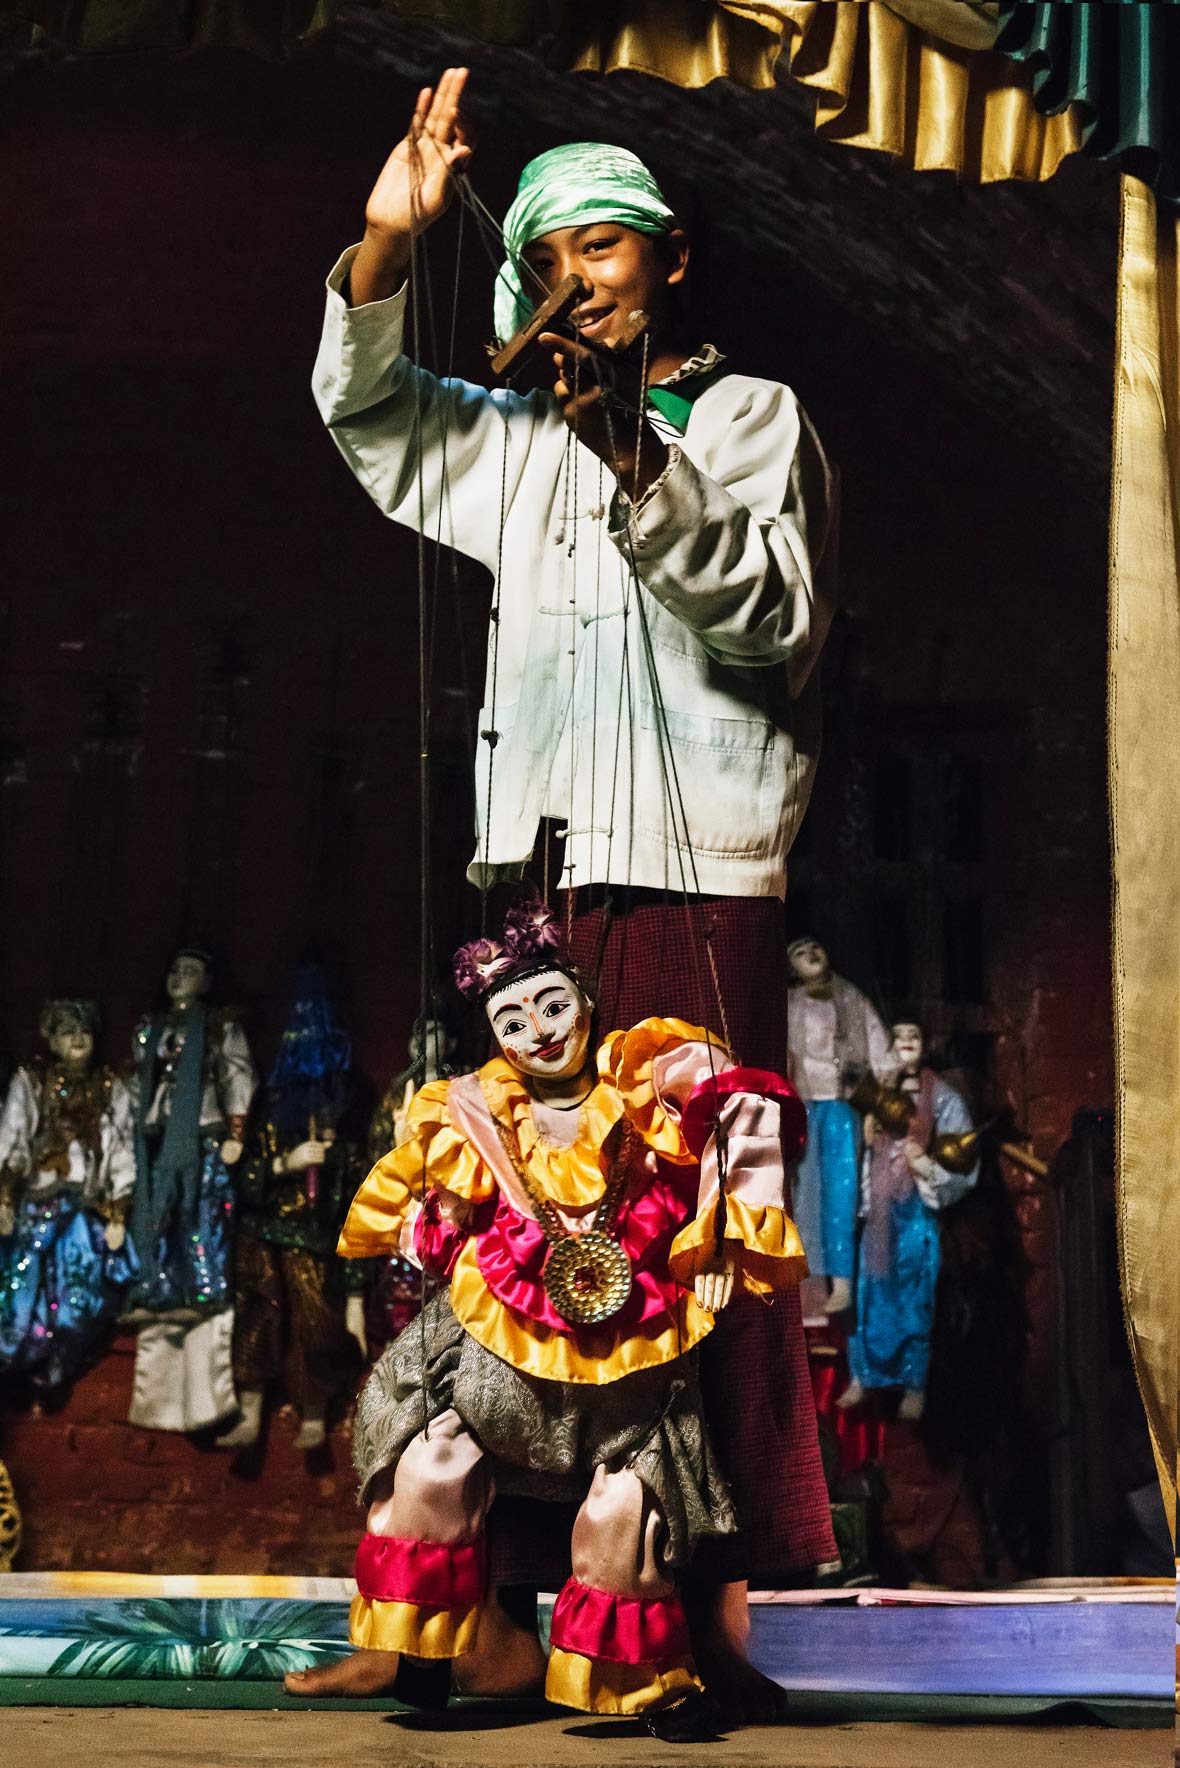 Traditional Puppet Show - Myanmar by Jlr